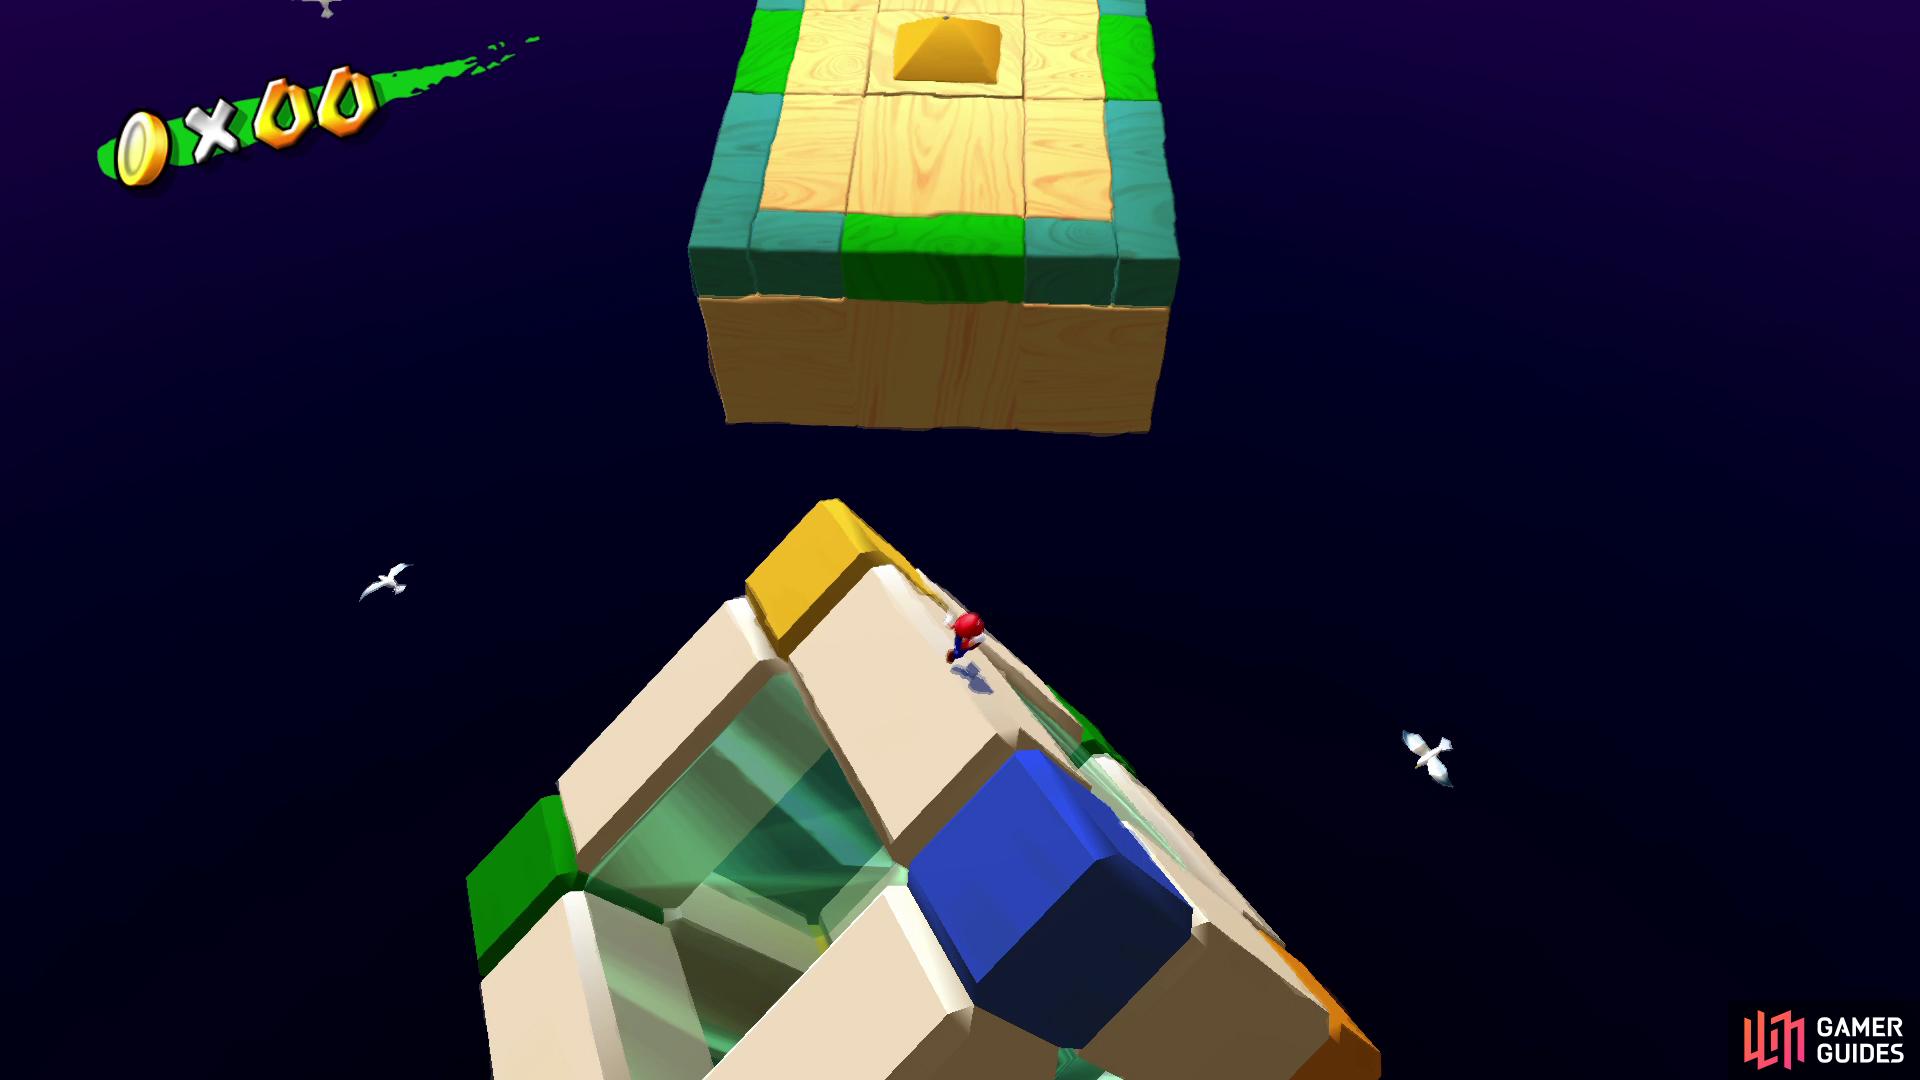 the final giant block will rotate in random positions.